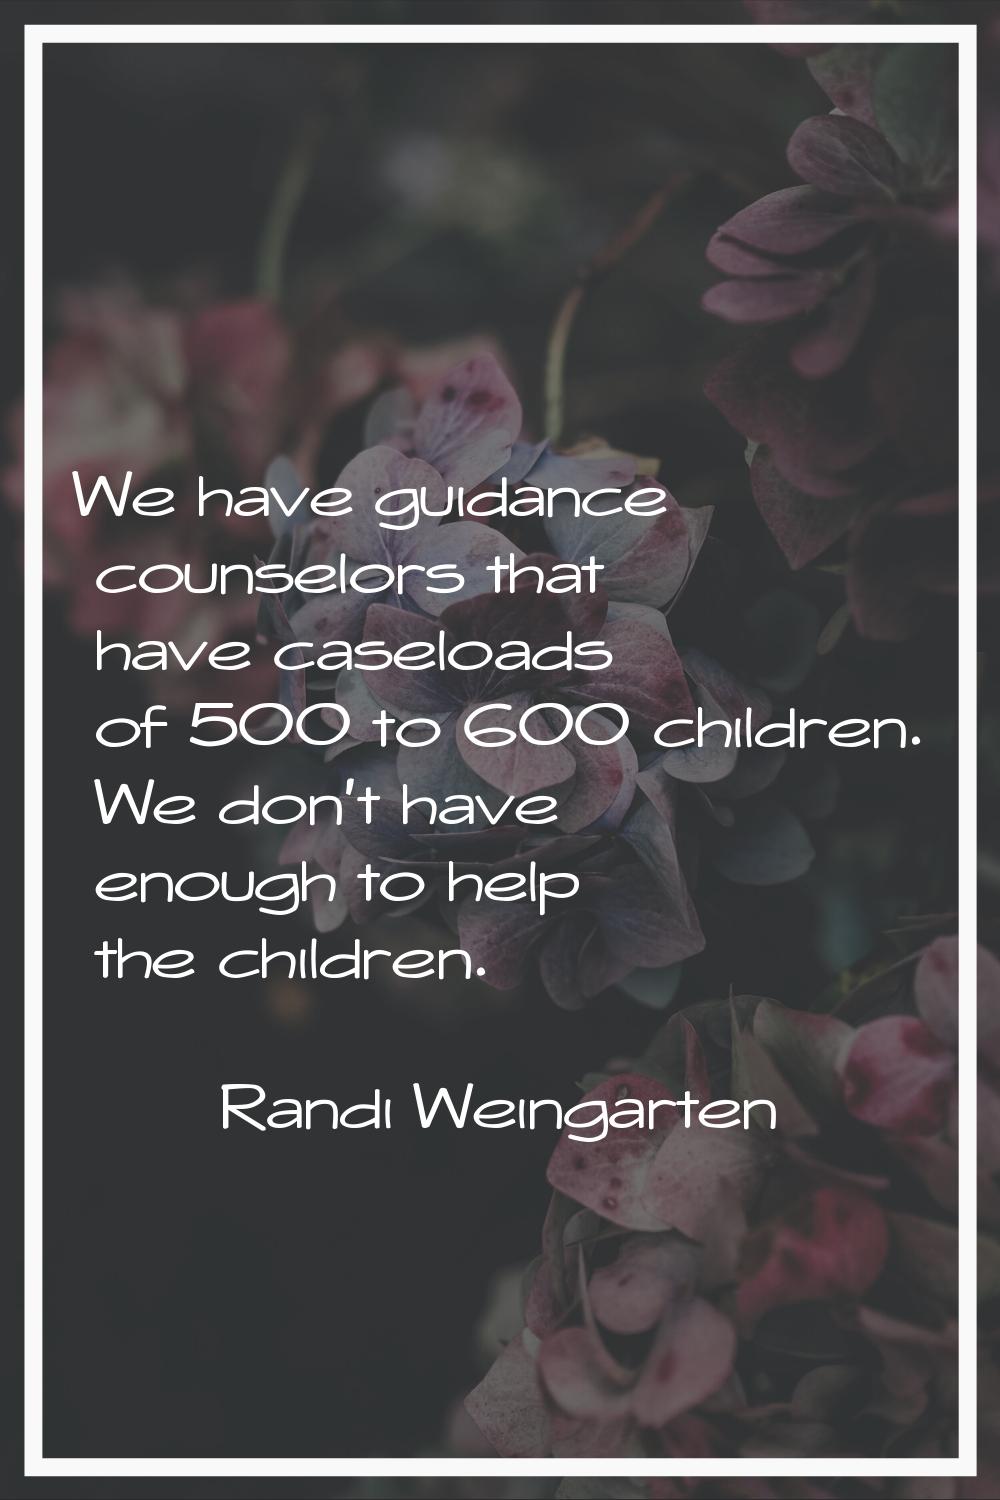 We have guidance counselors that have caseloads of 500 to 600 children. We don't have enough to hel